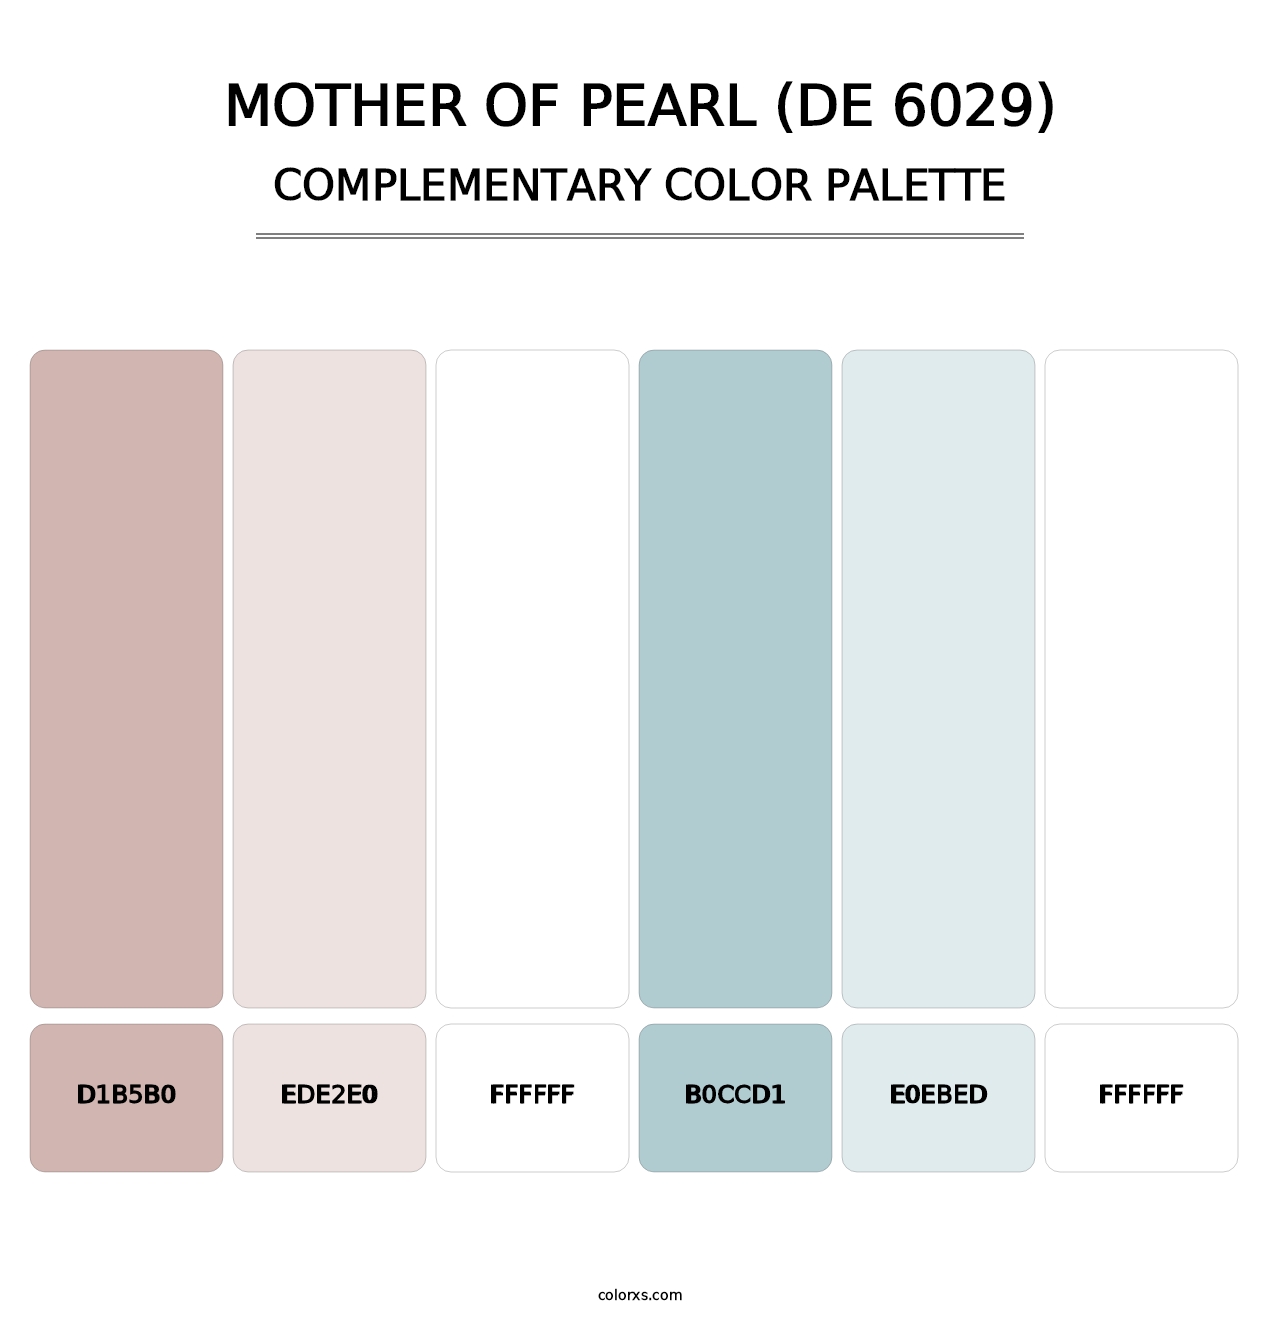 Mother of Pearl (DE 6029) - Complementary Color Palette